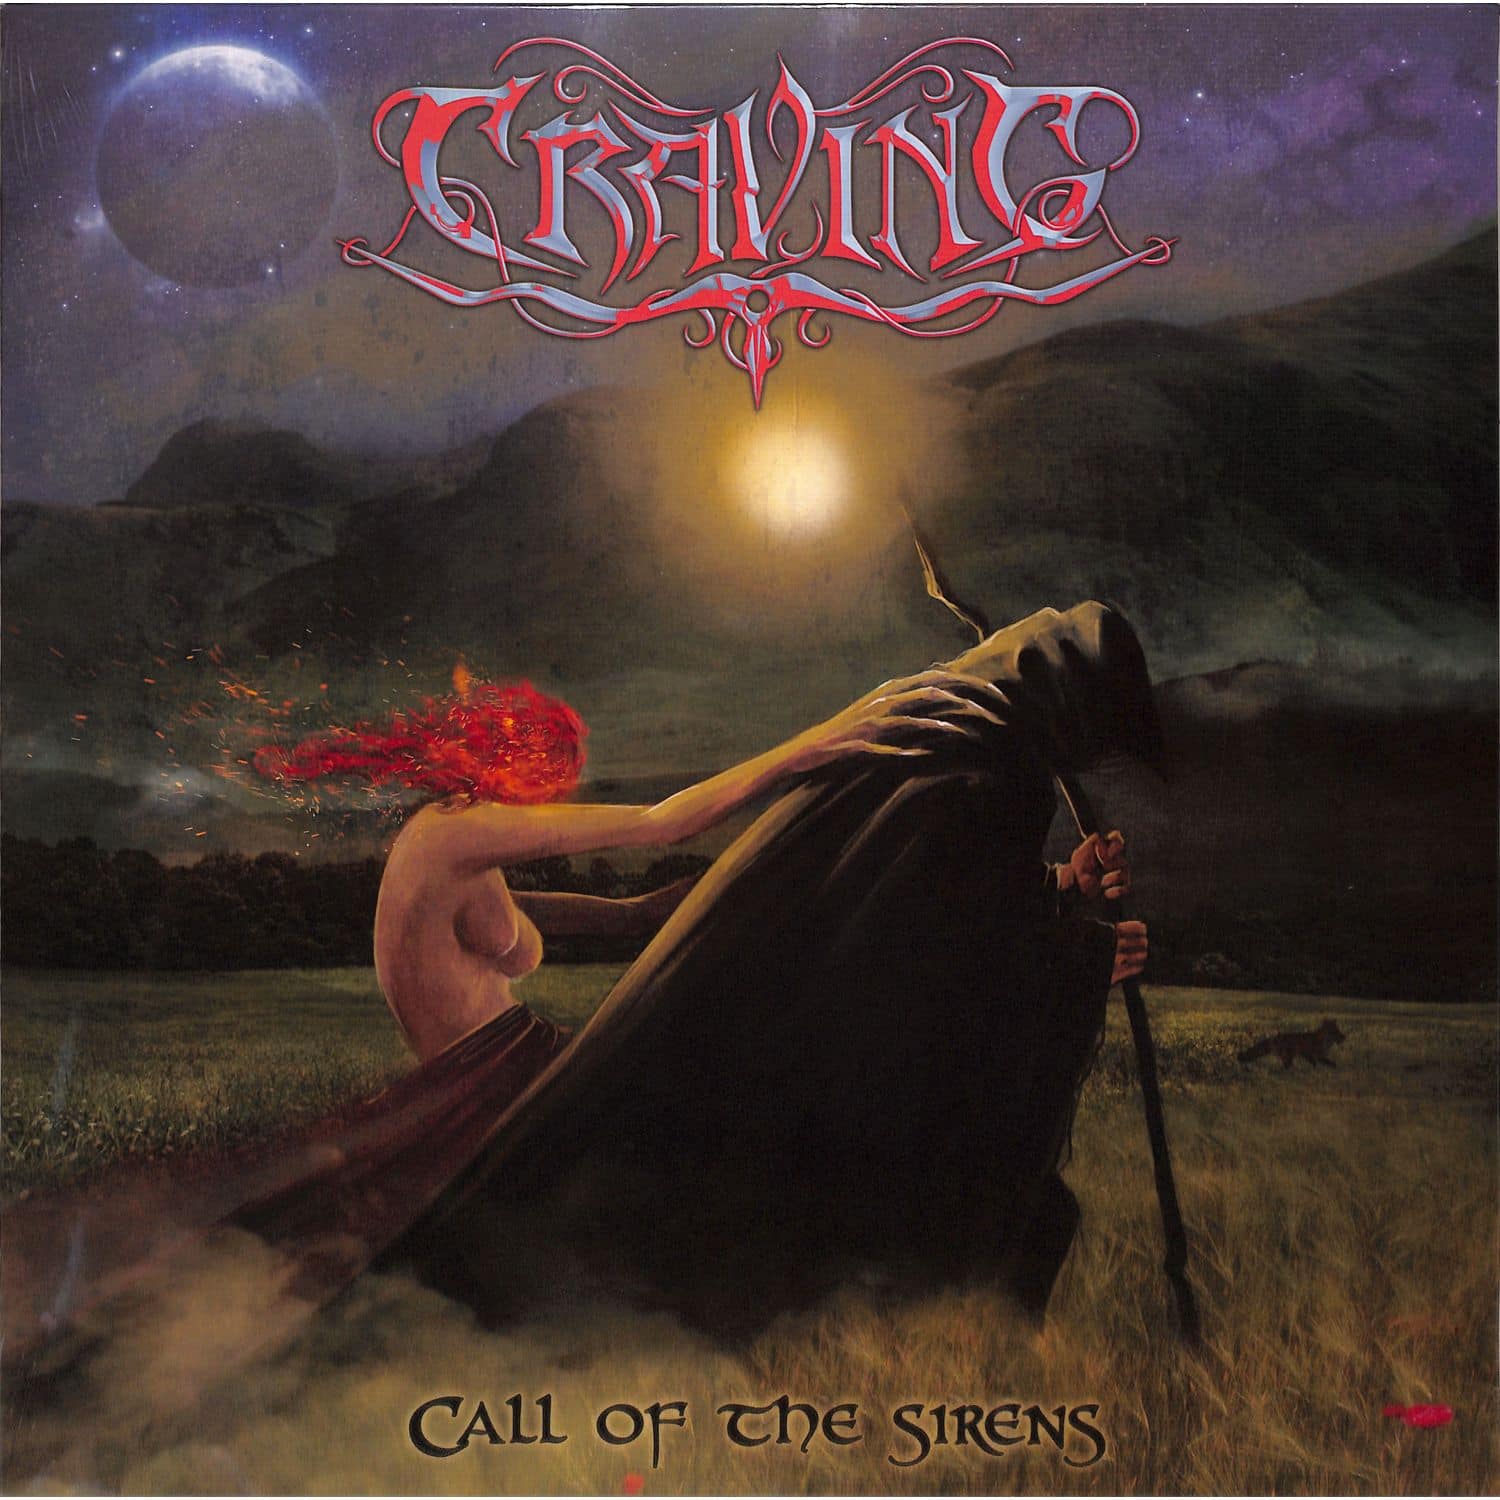 Craving - CALL OF THE SIRENS 